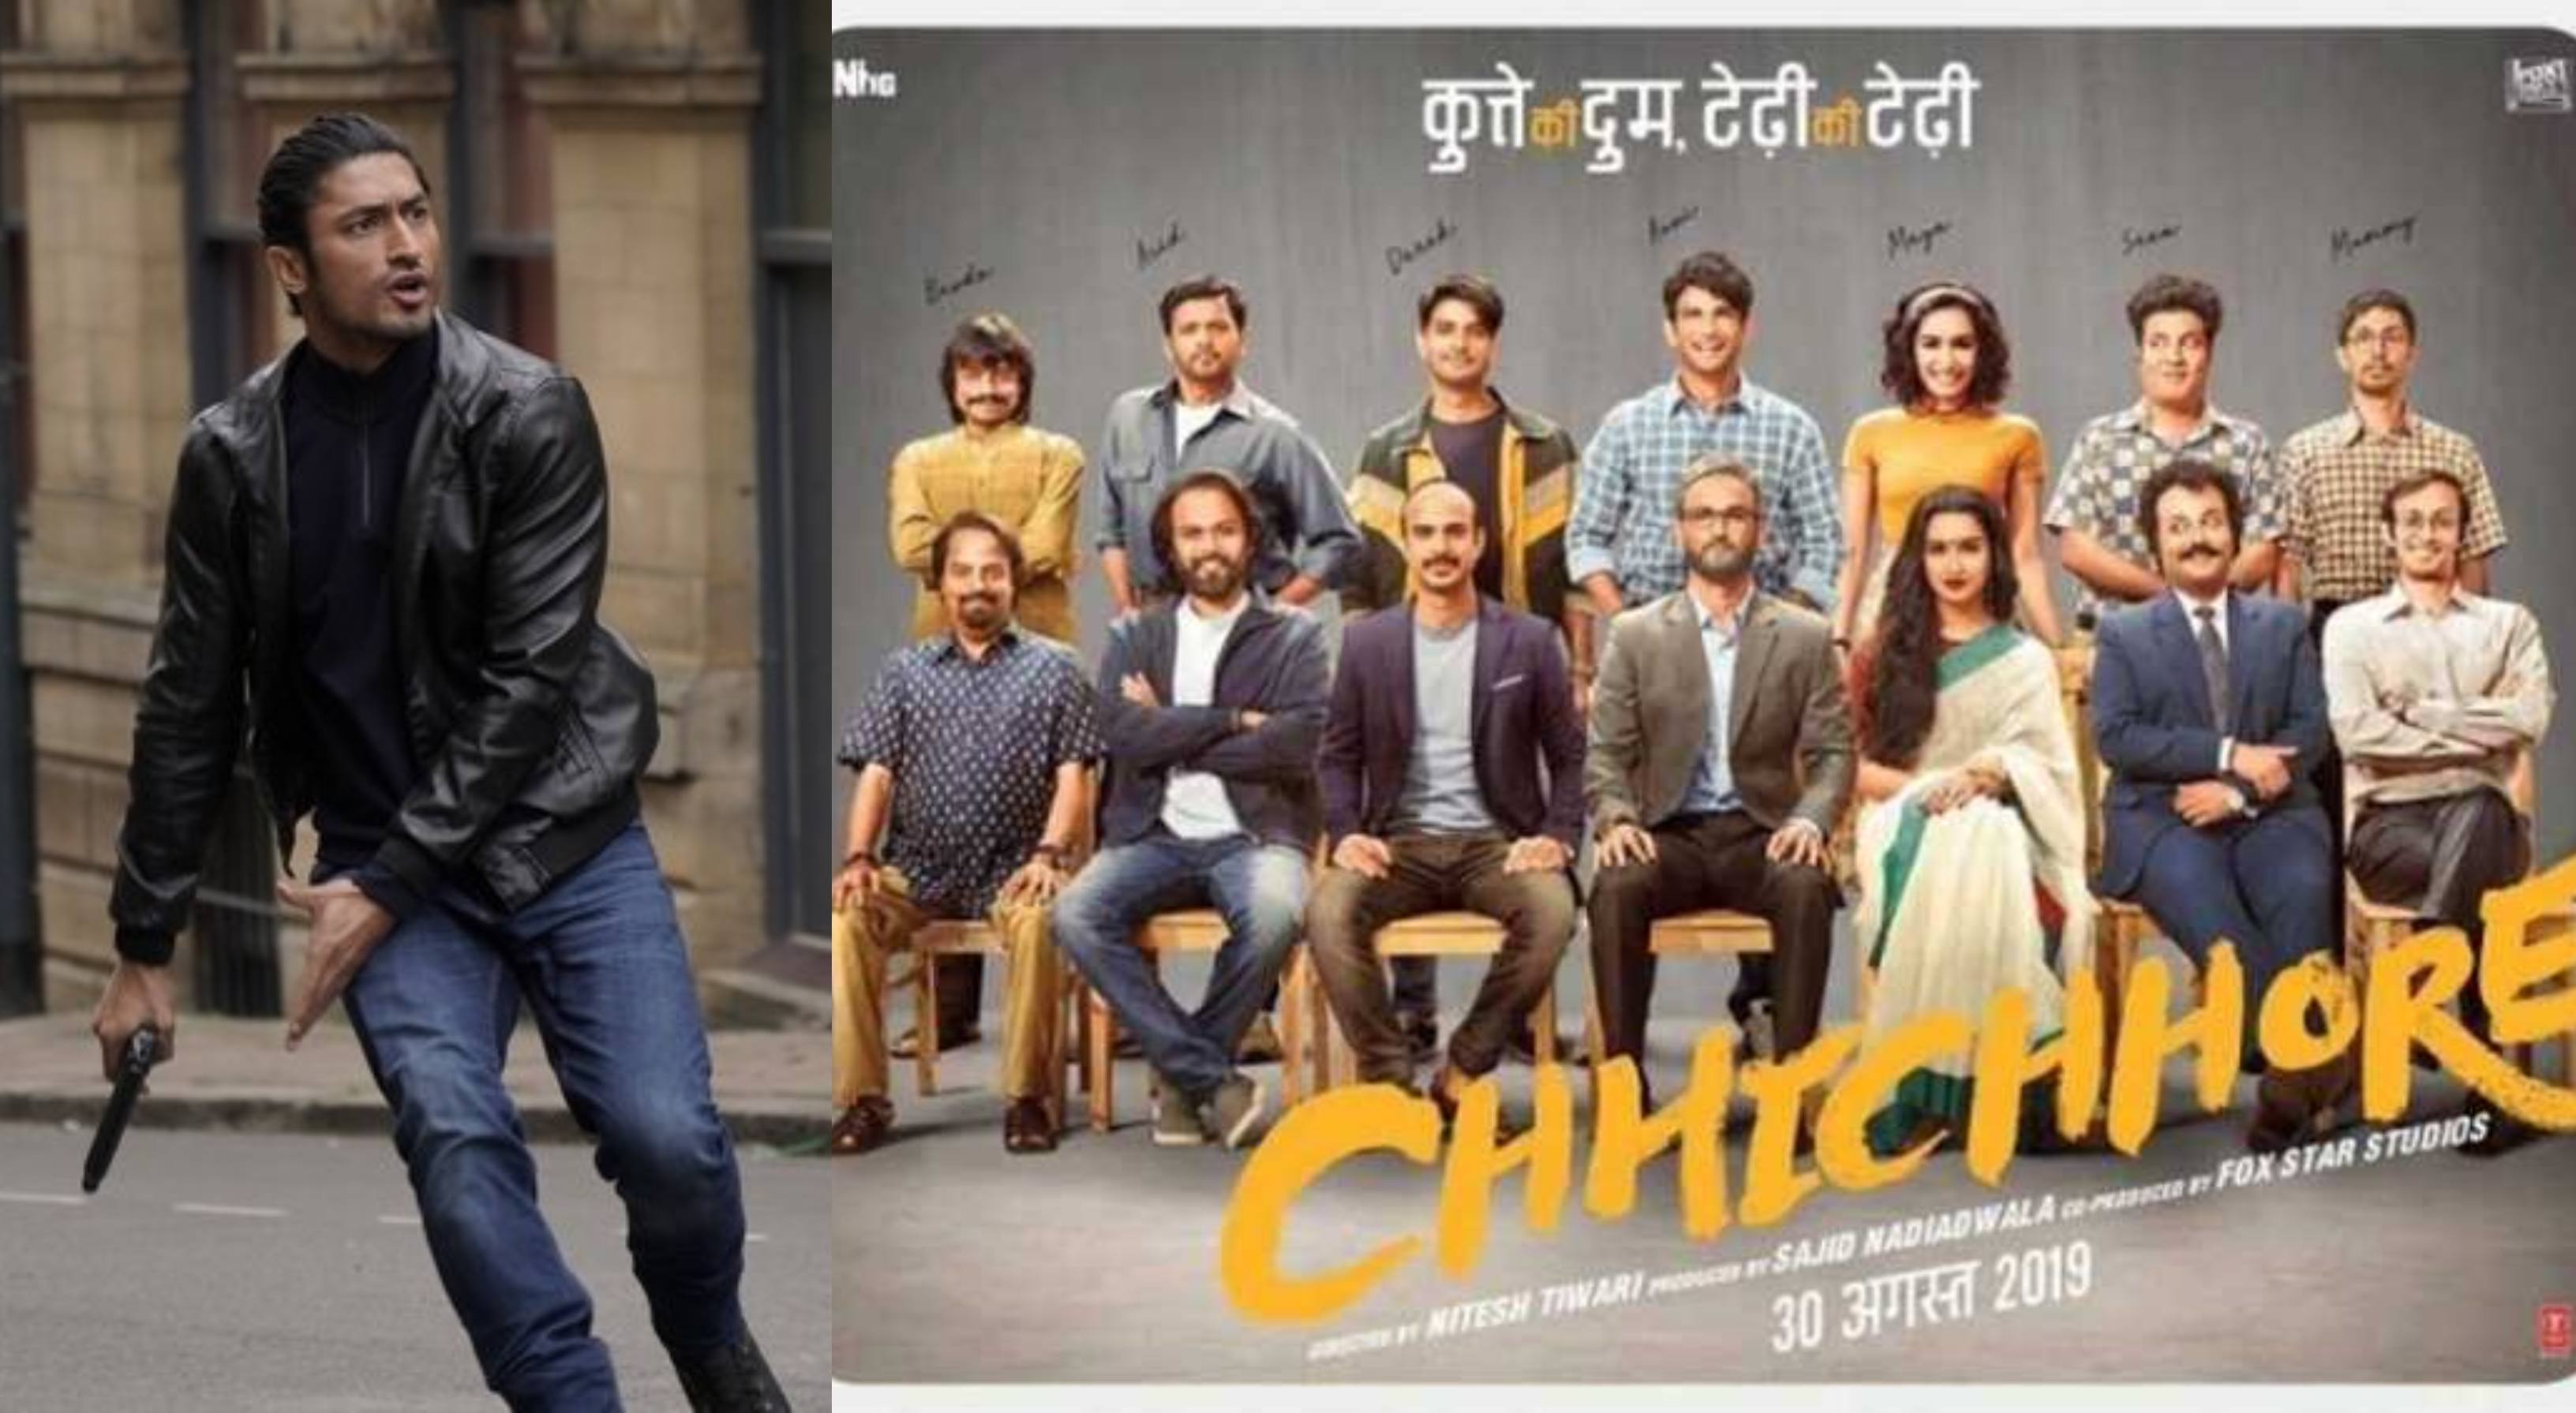 Commando 3 And Chhichhore Get New Release Dates